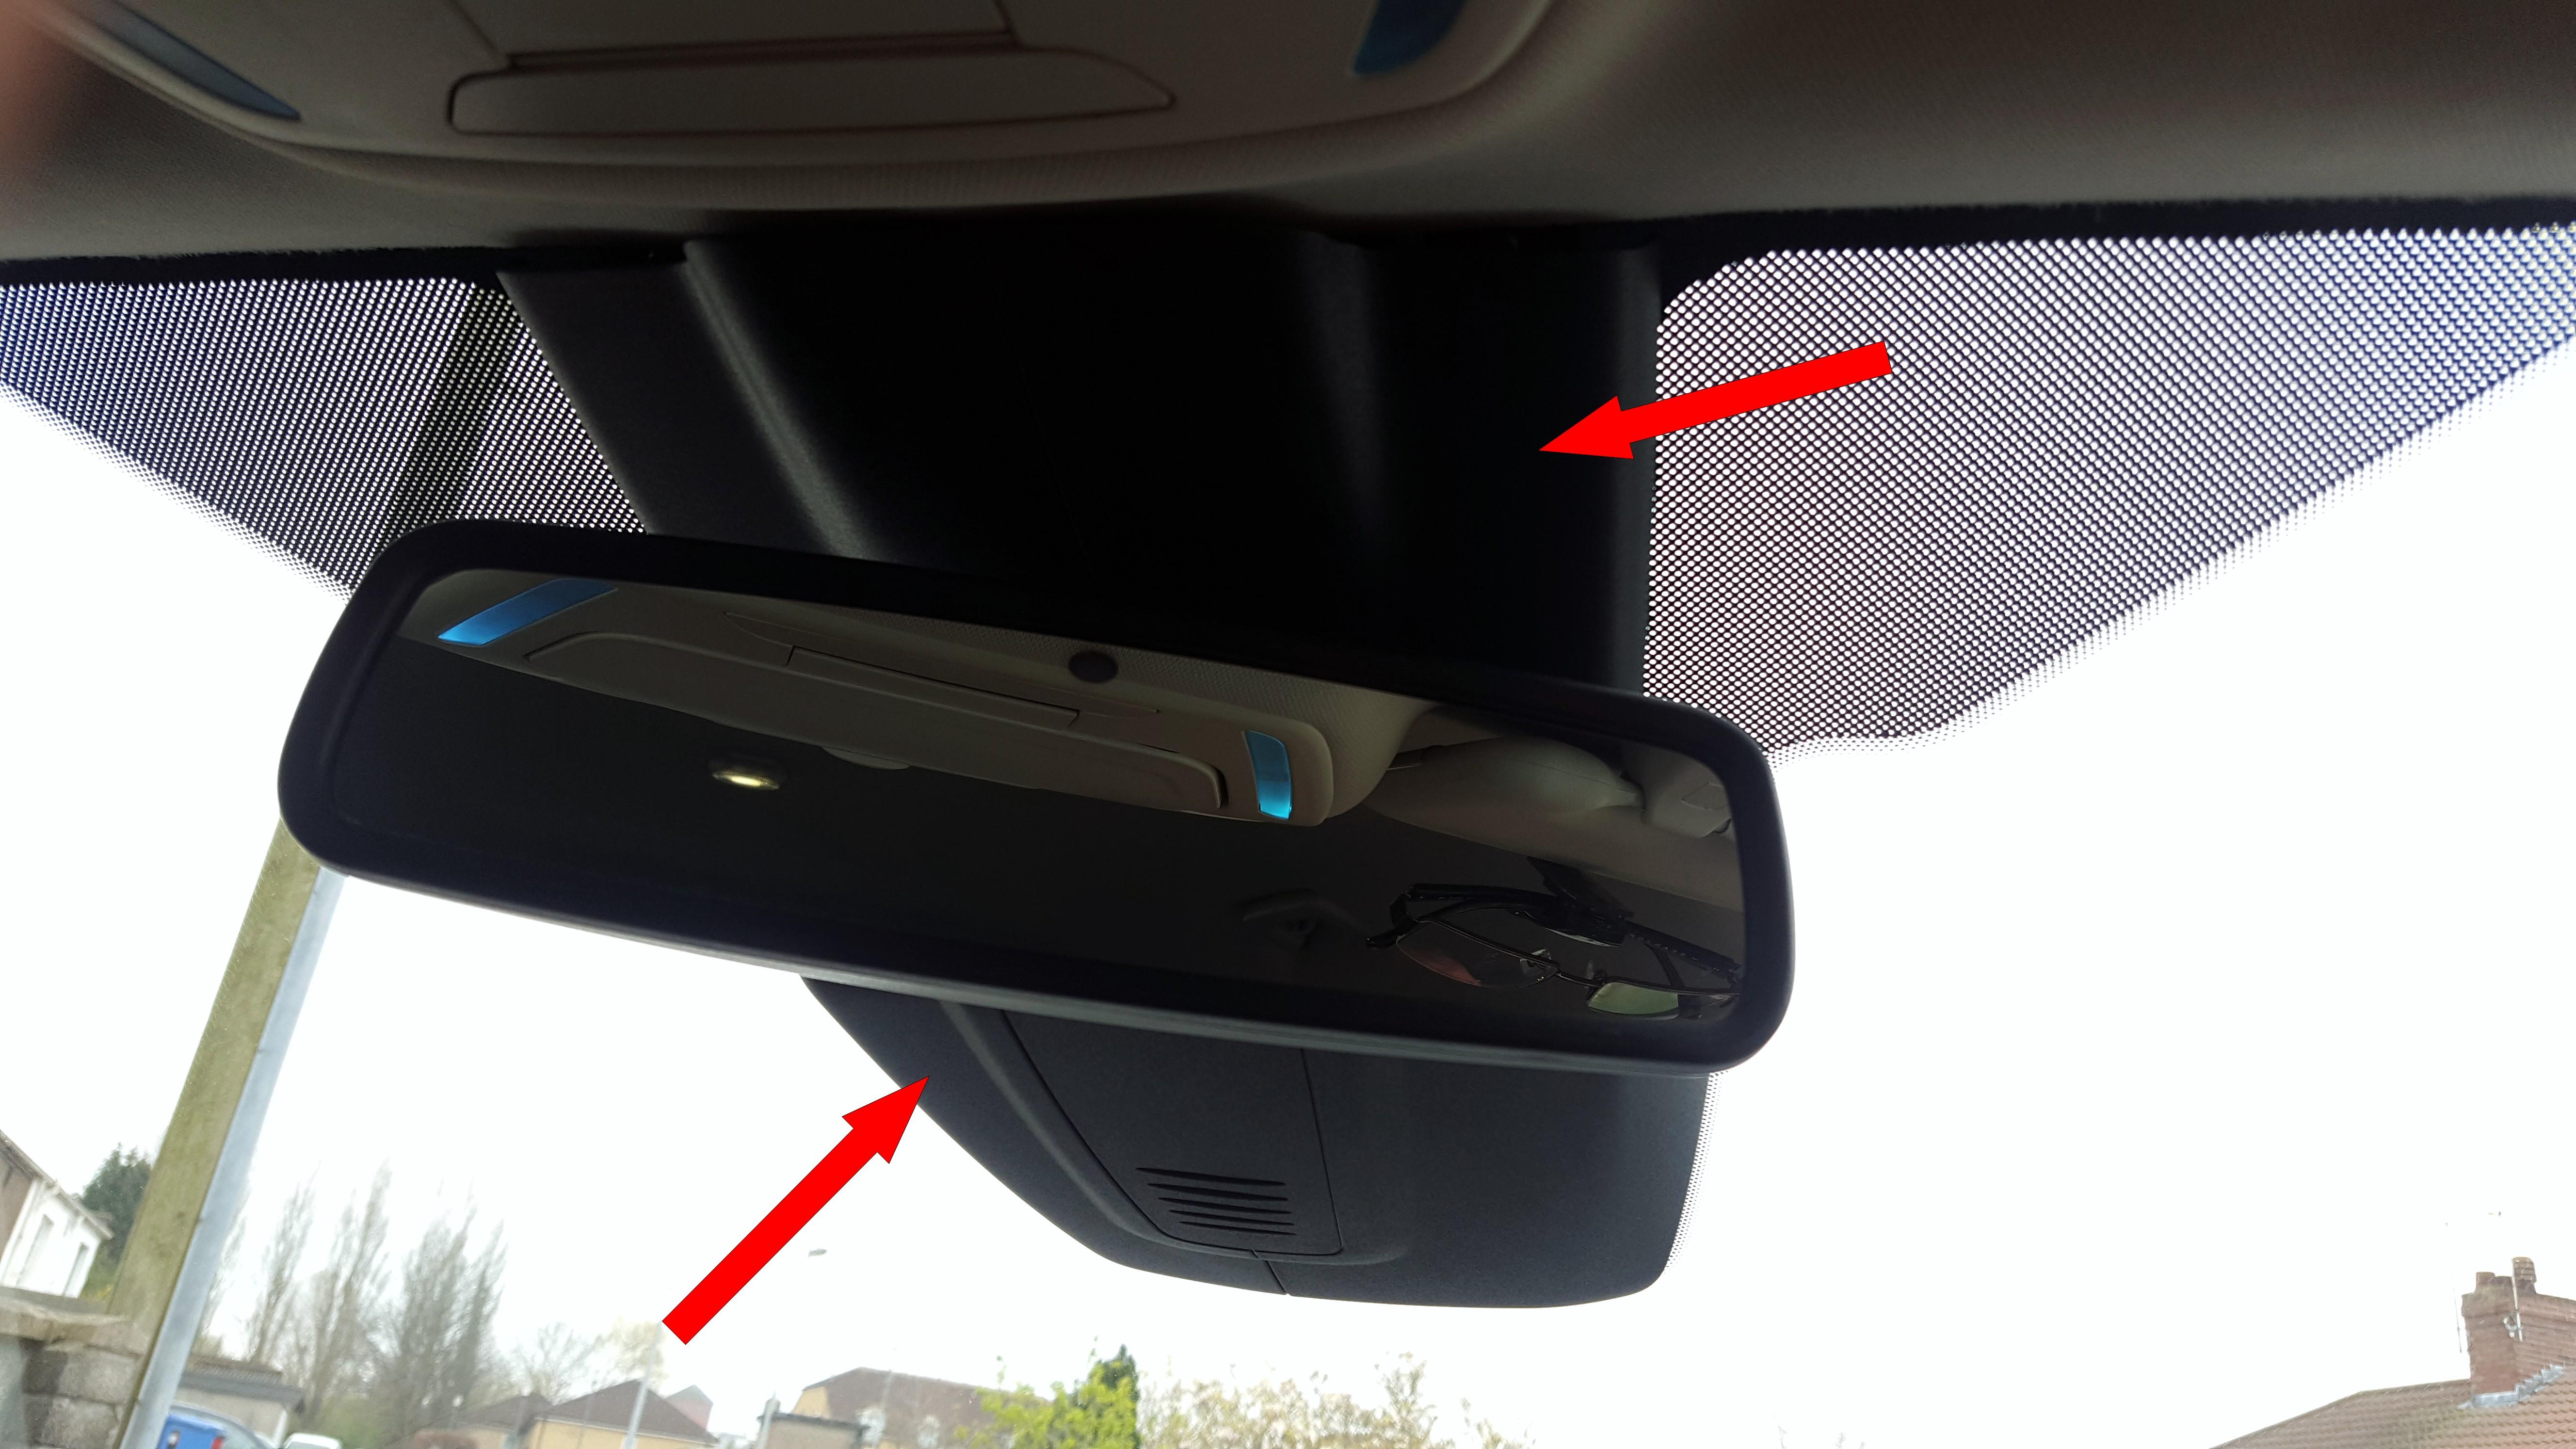 How to remove the plastic cover behind the rear mirror - Ford Focus Club -  Ford Owners Club - Ford Forums